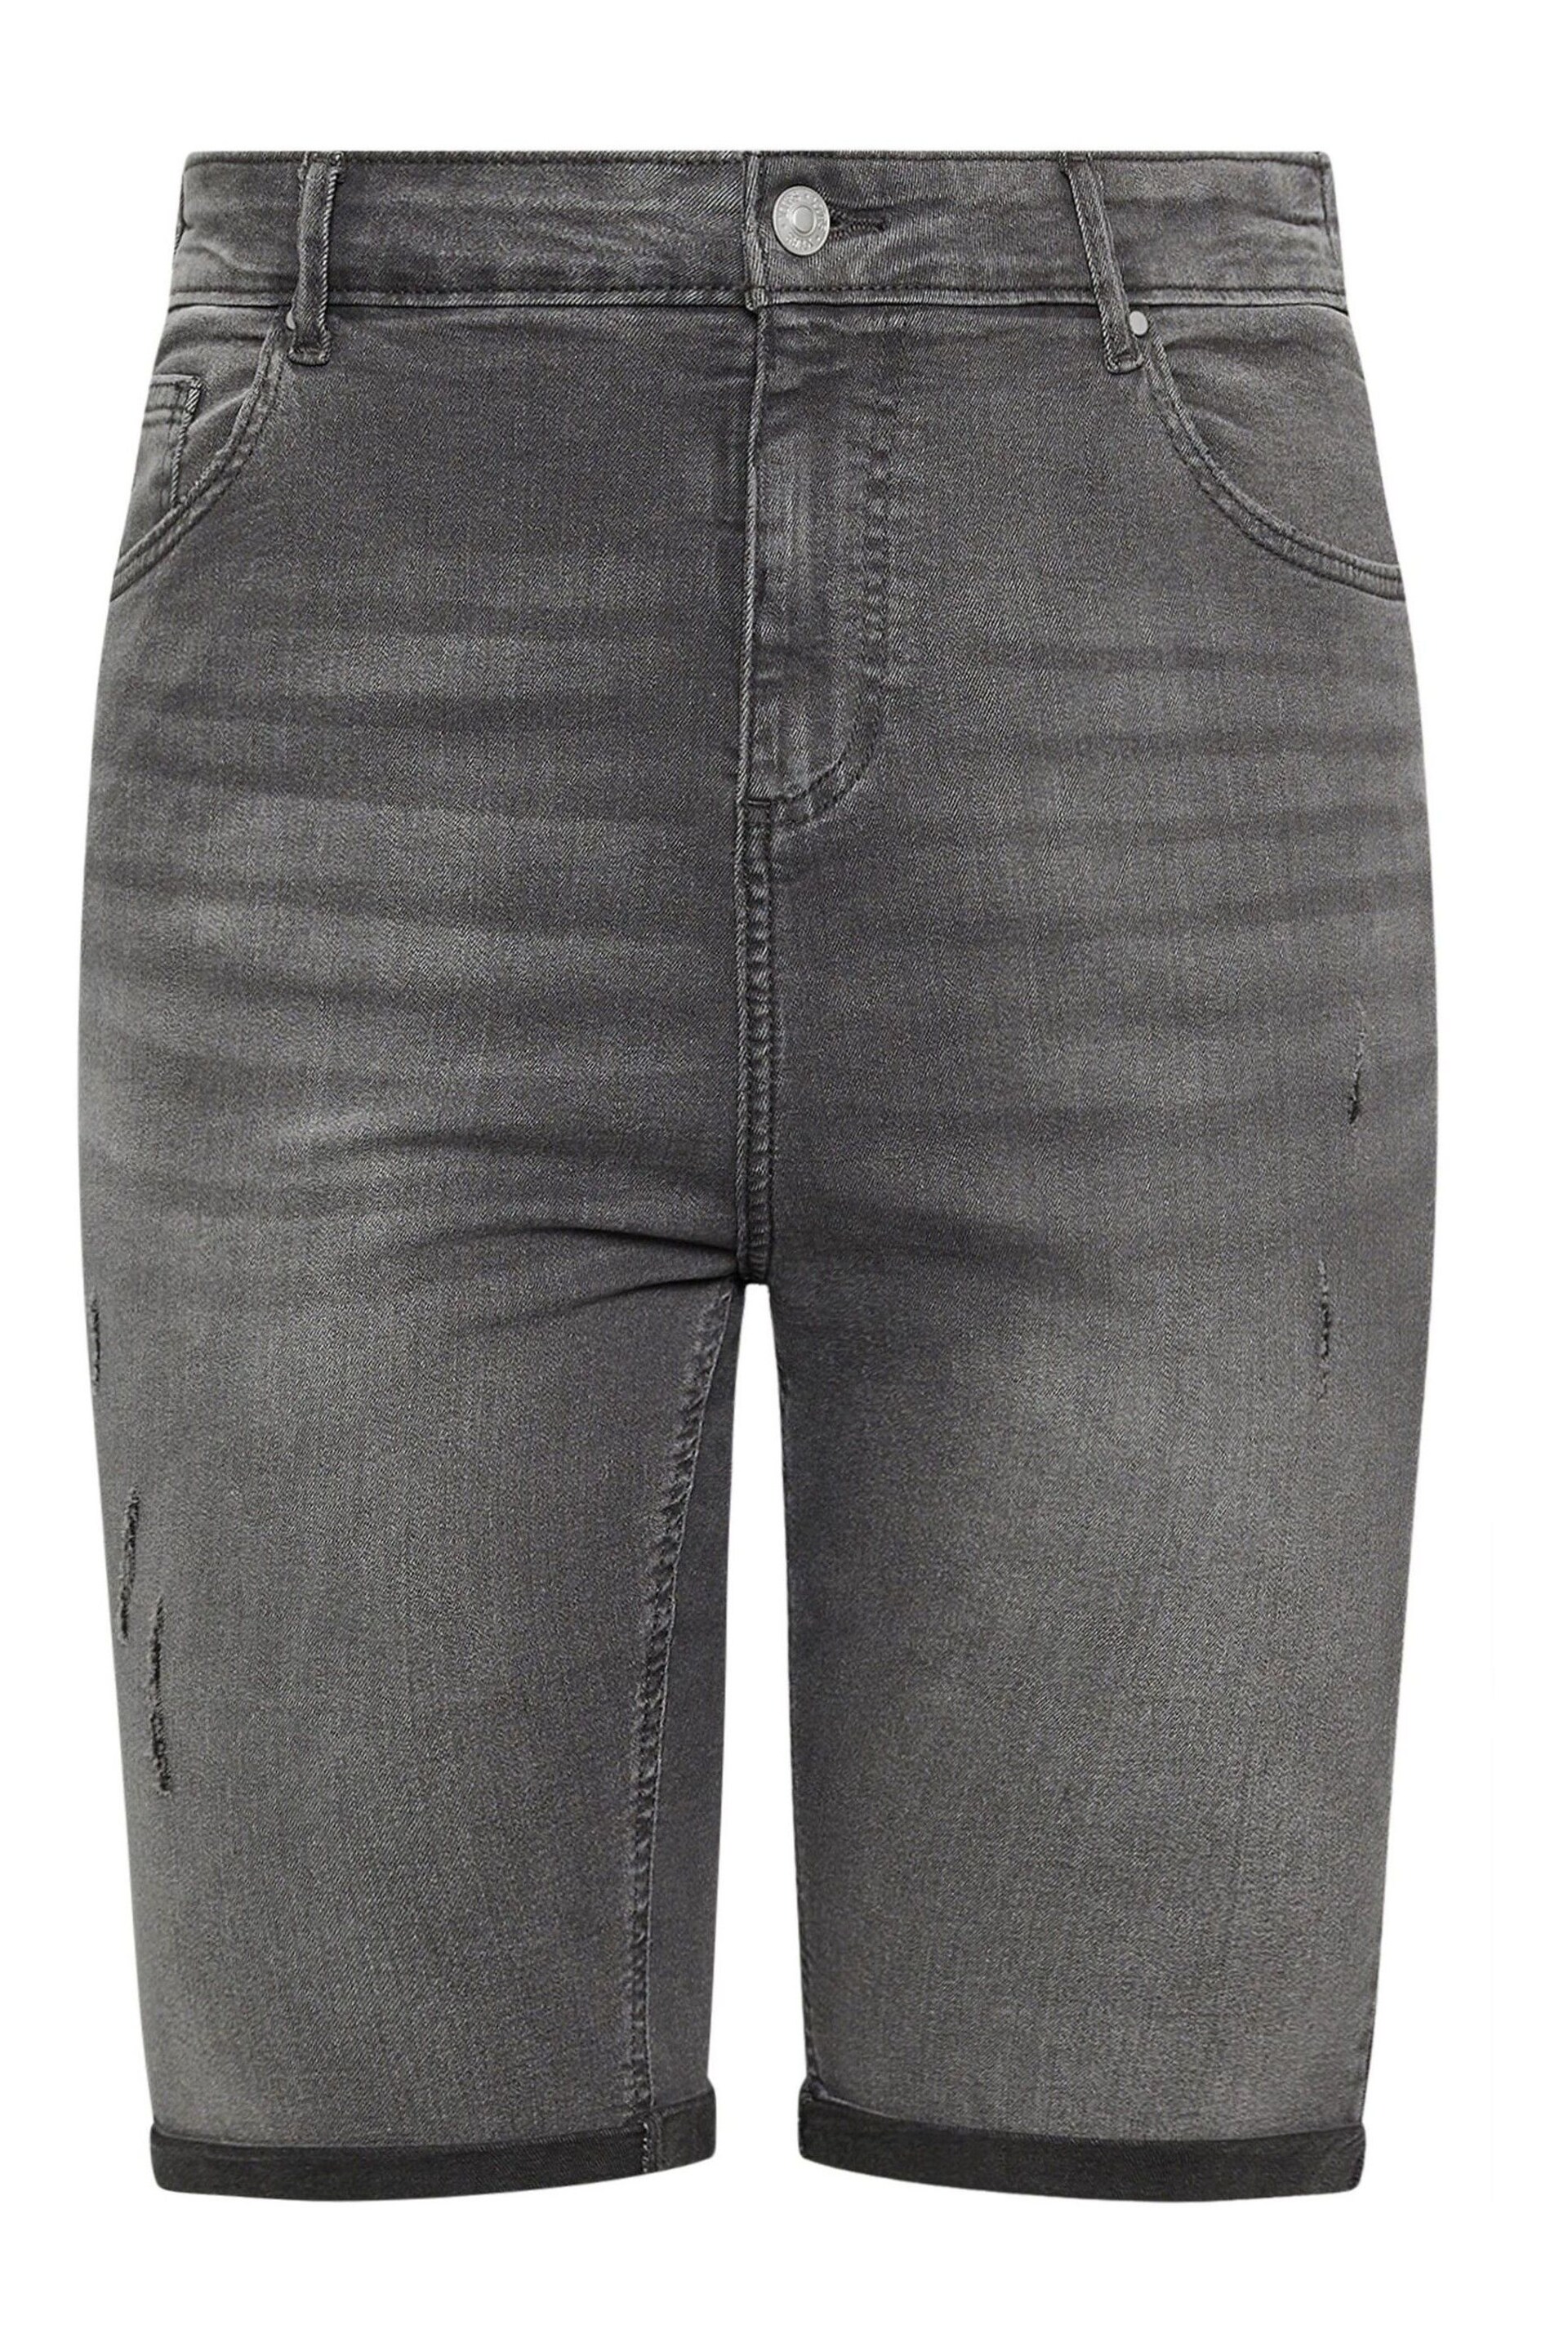 Yours Curve Grey Cat Scratch Denim Shorts - Image 5 of 5